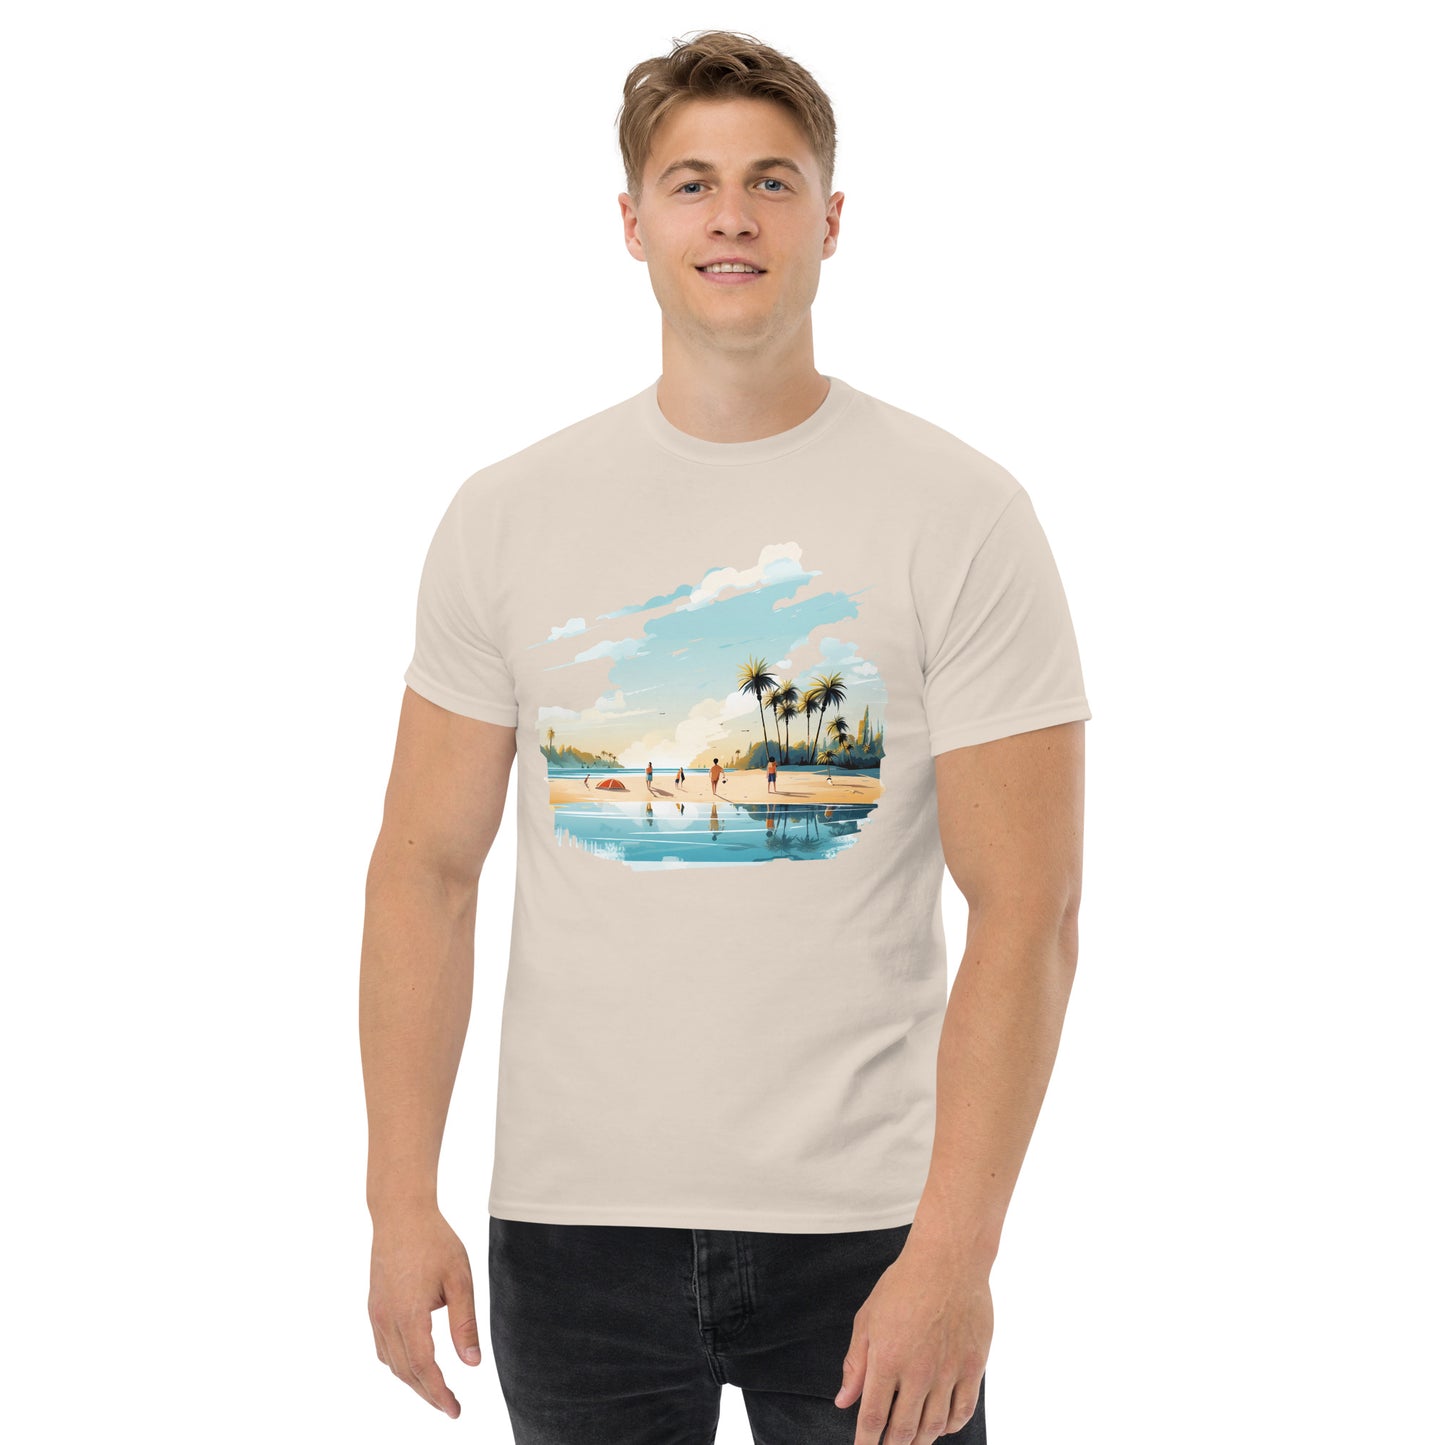 Men with natural T-shirt and a picture of a island with sea and sand